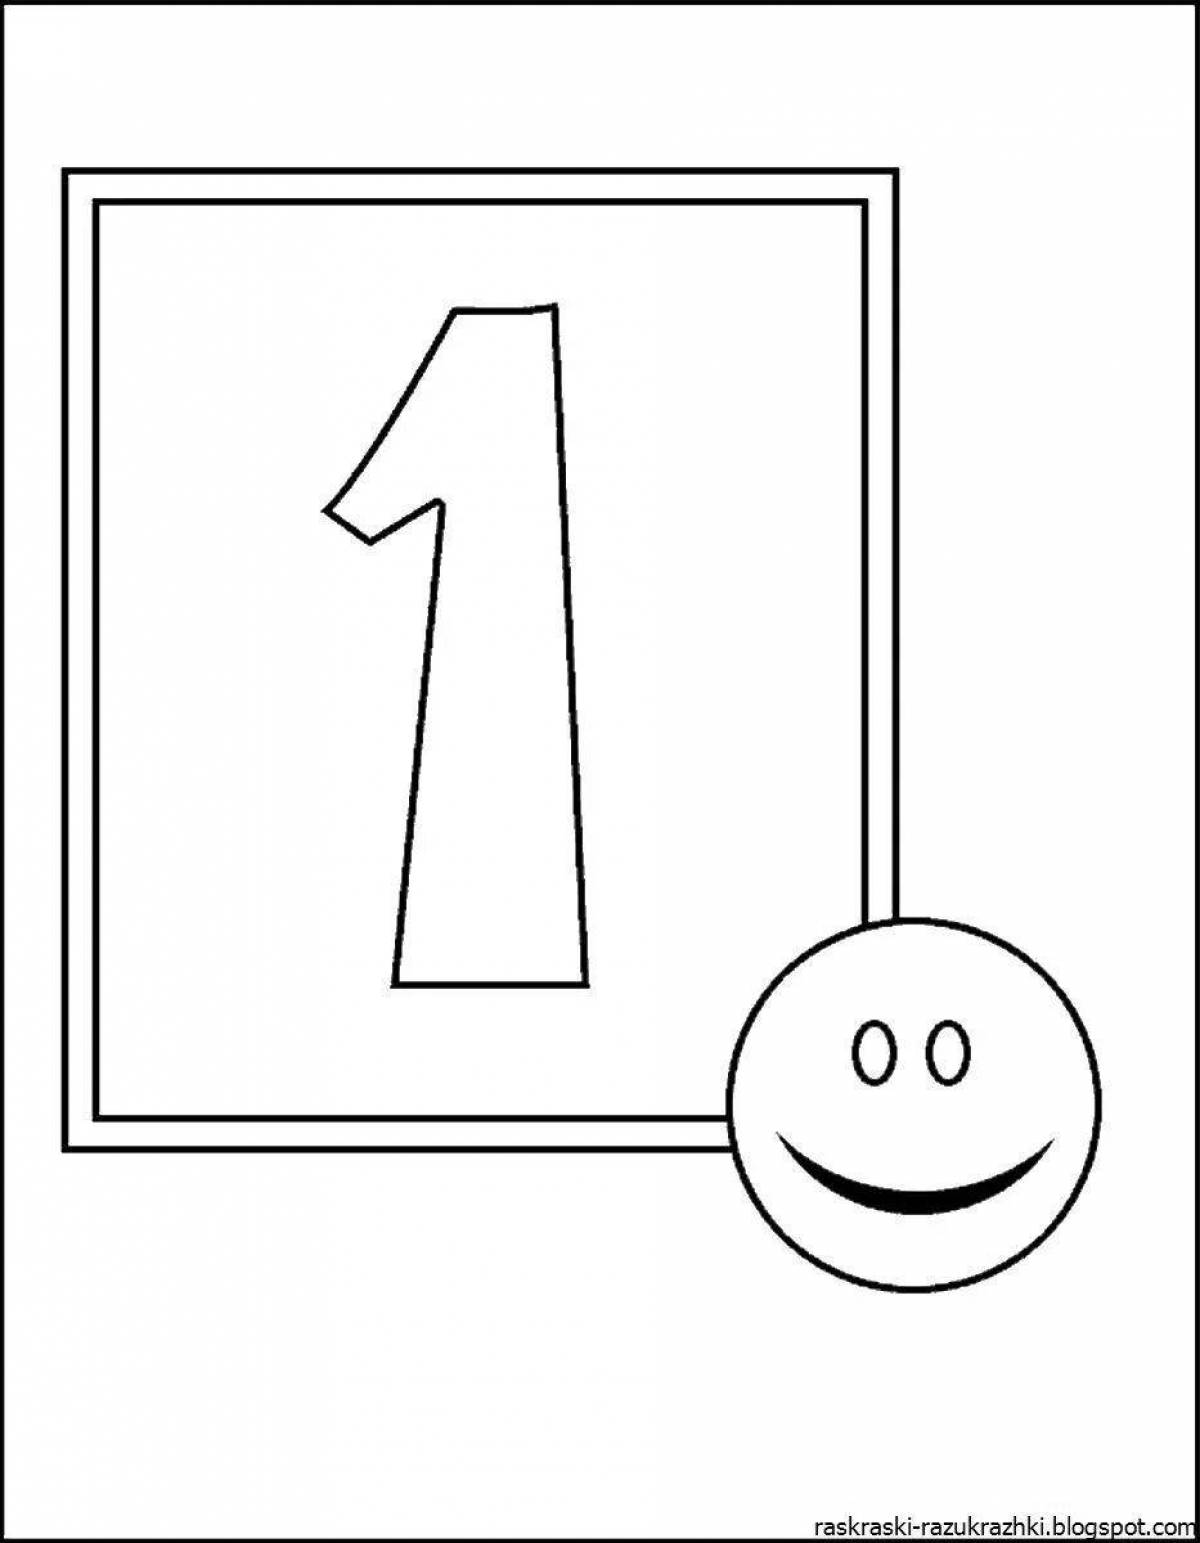 Bright single number coloring page